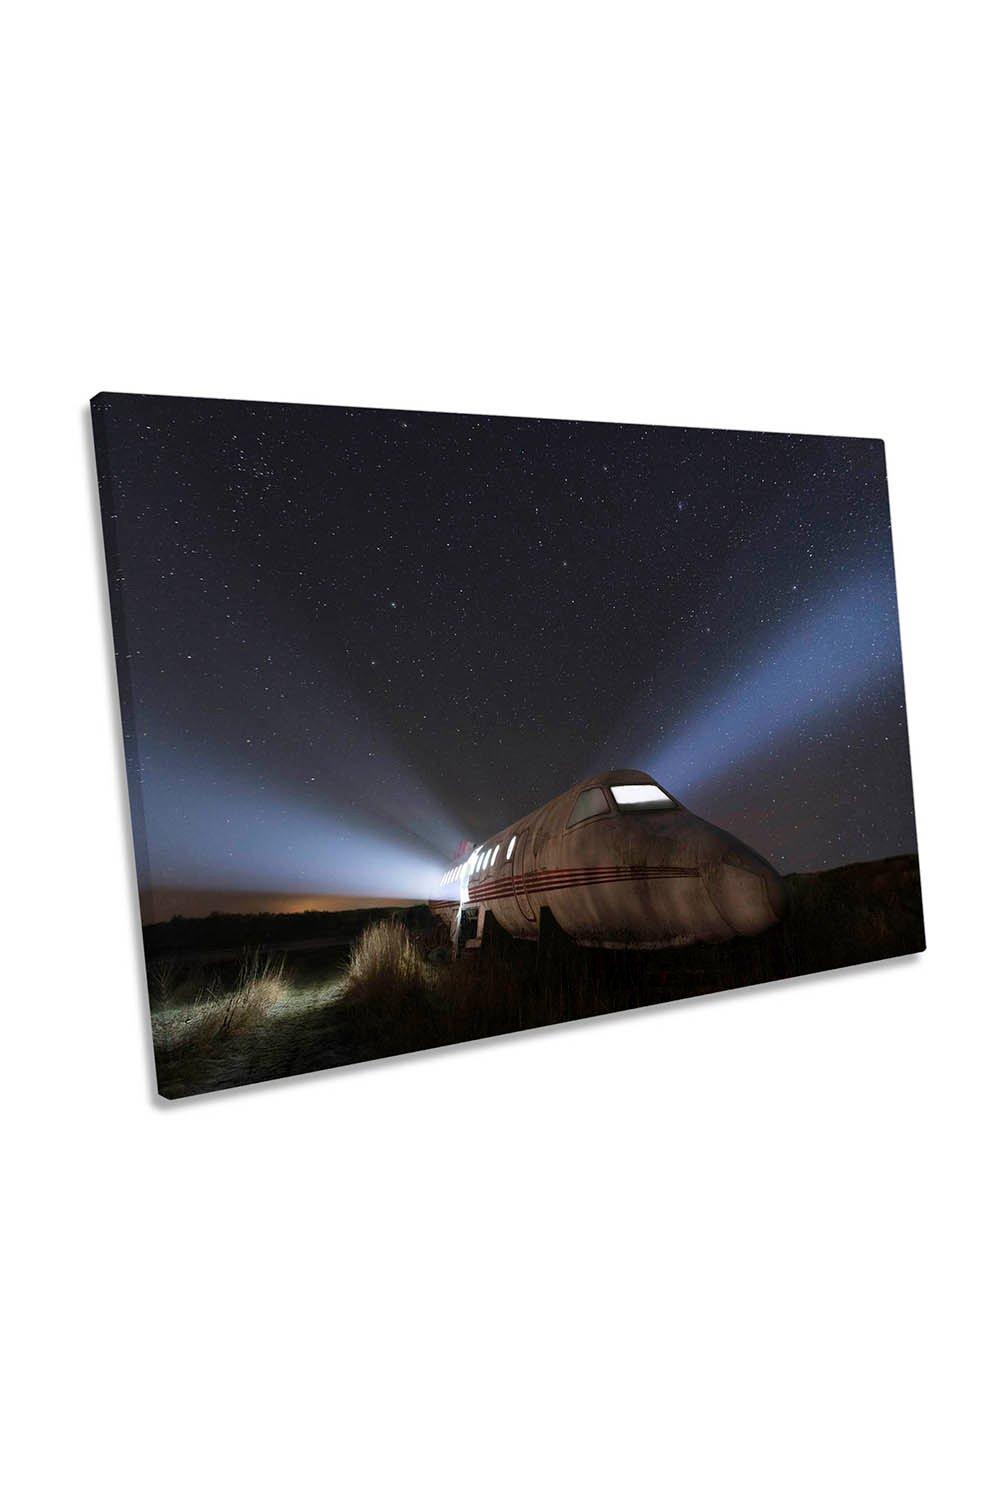 Abandoned Plane Wreck Stars Canvas Wall Art Picture Print